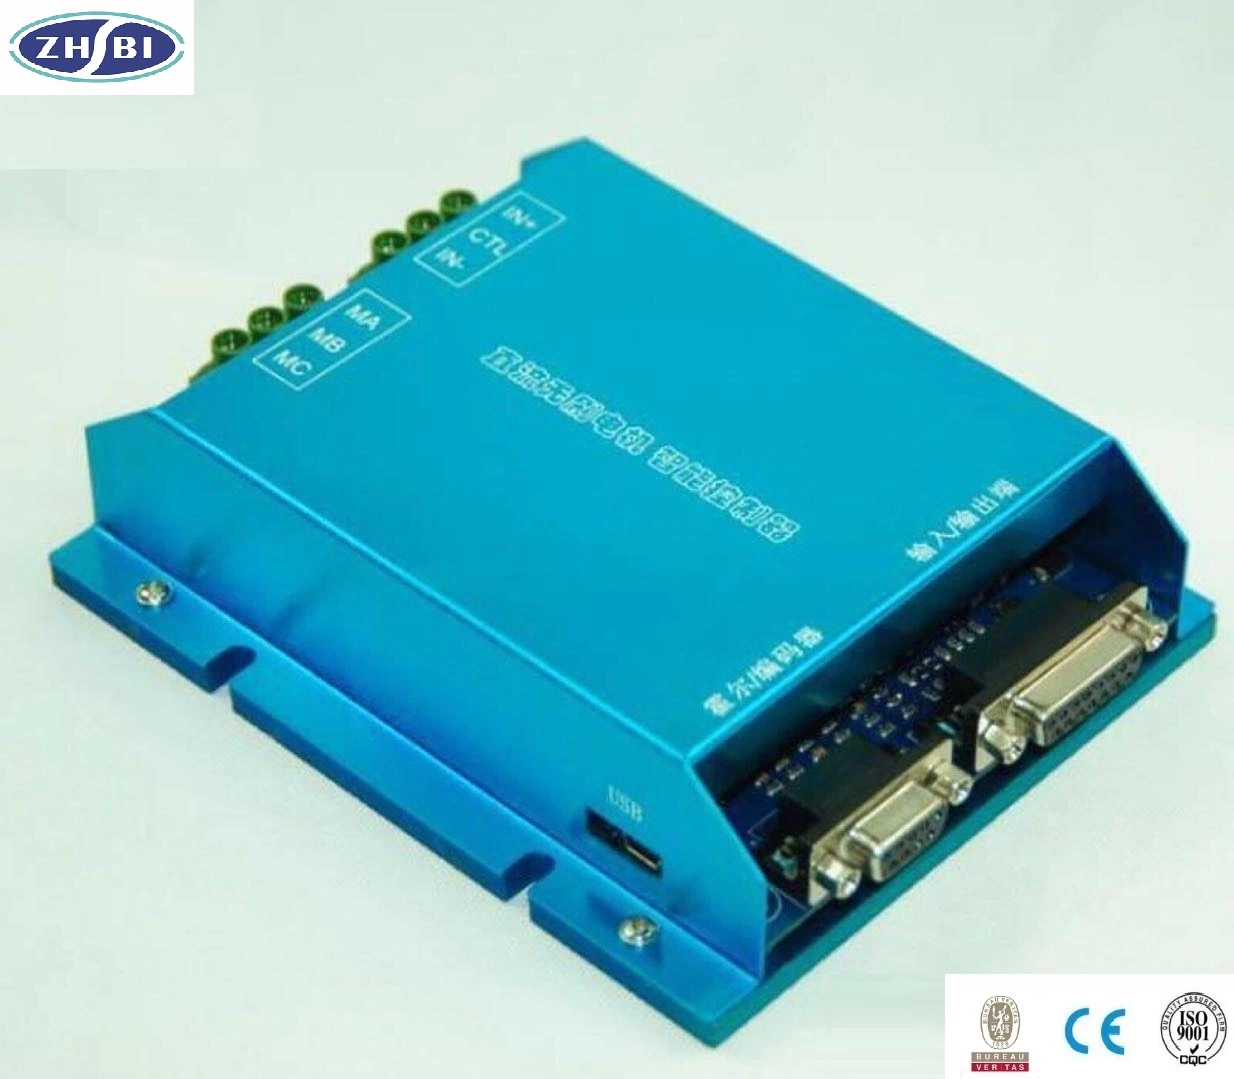 High Performance 48V Brushless DC Motor Controller 1kw BLDC Controller for Magnetic Track Guided Agv, Tracked Vehicle